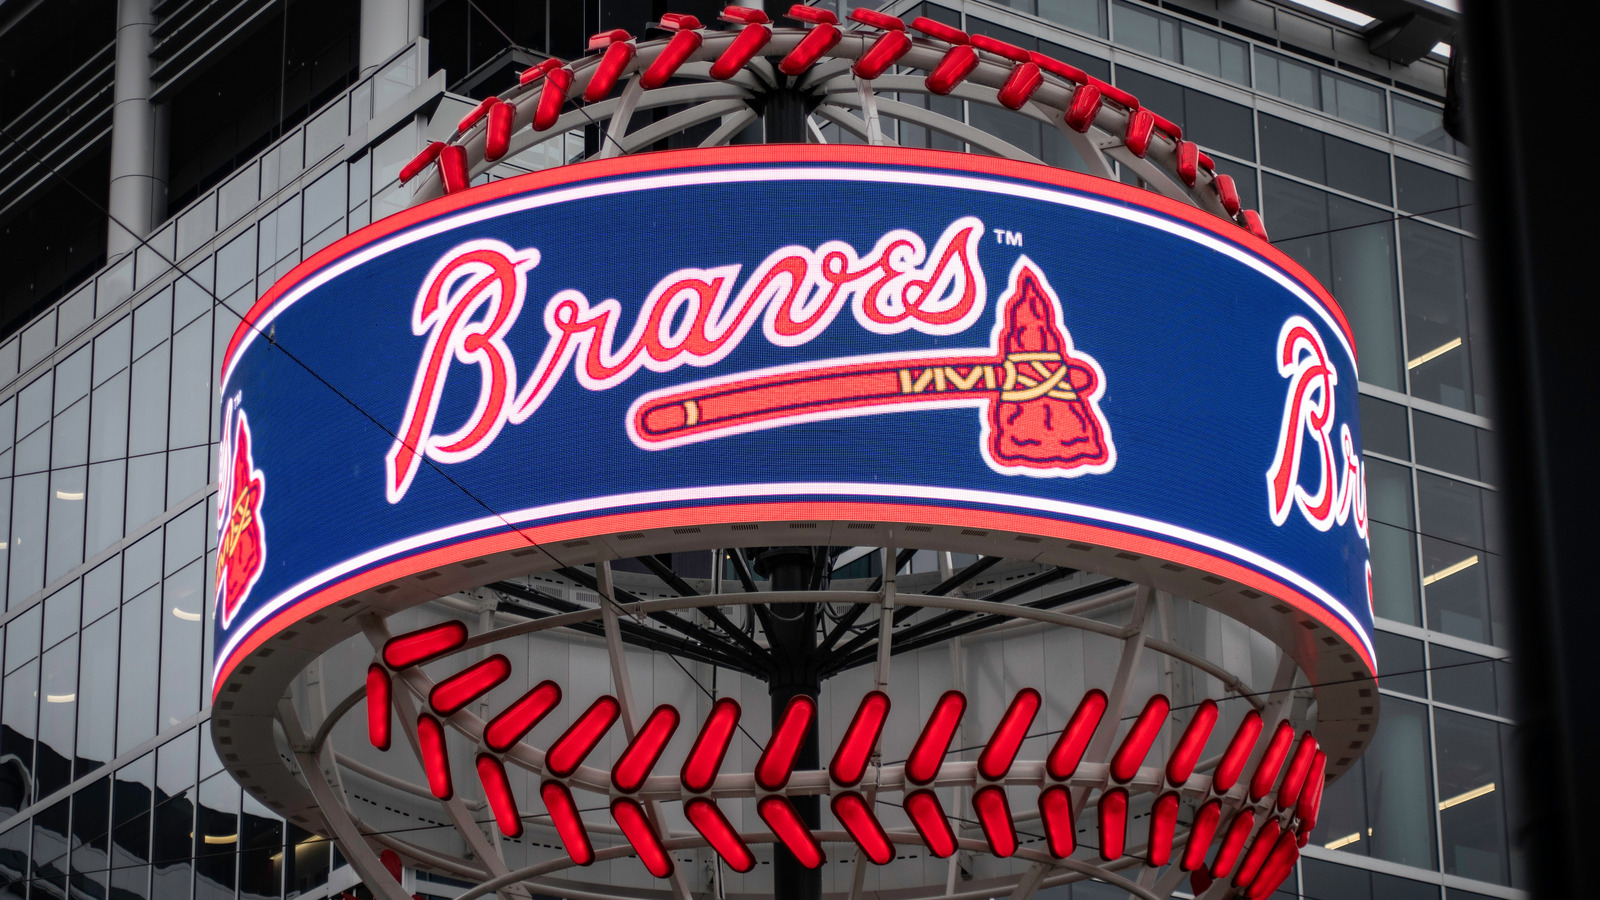 Braves World Series ring comes with $25,000 burger